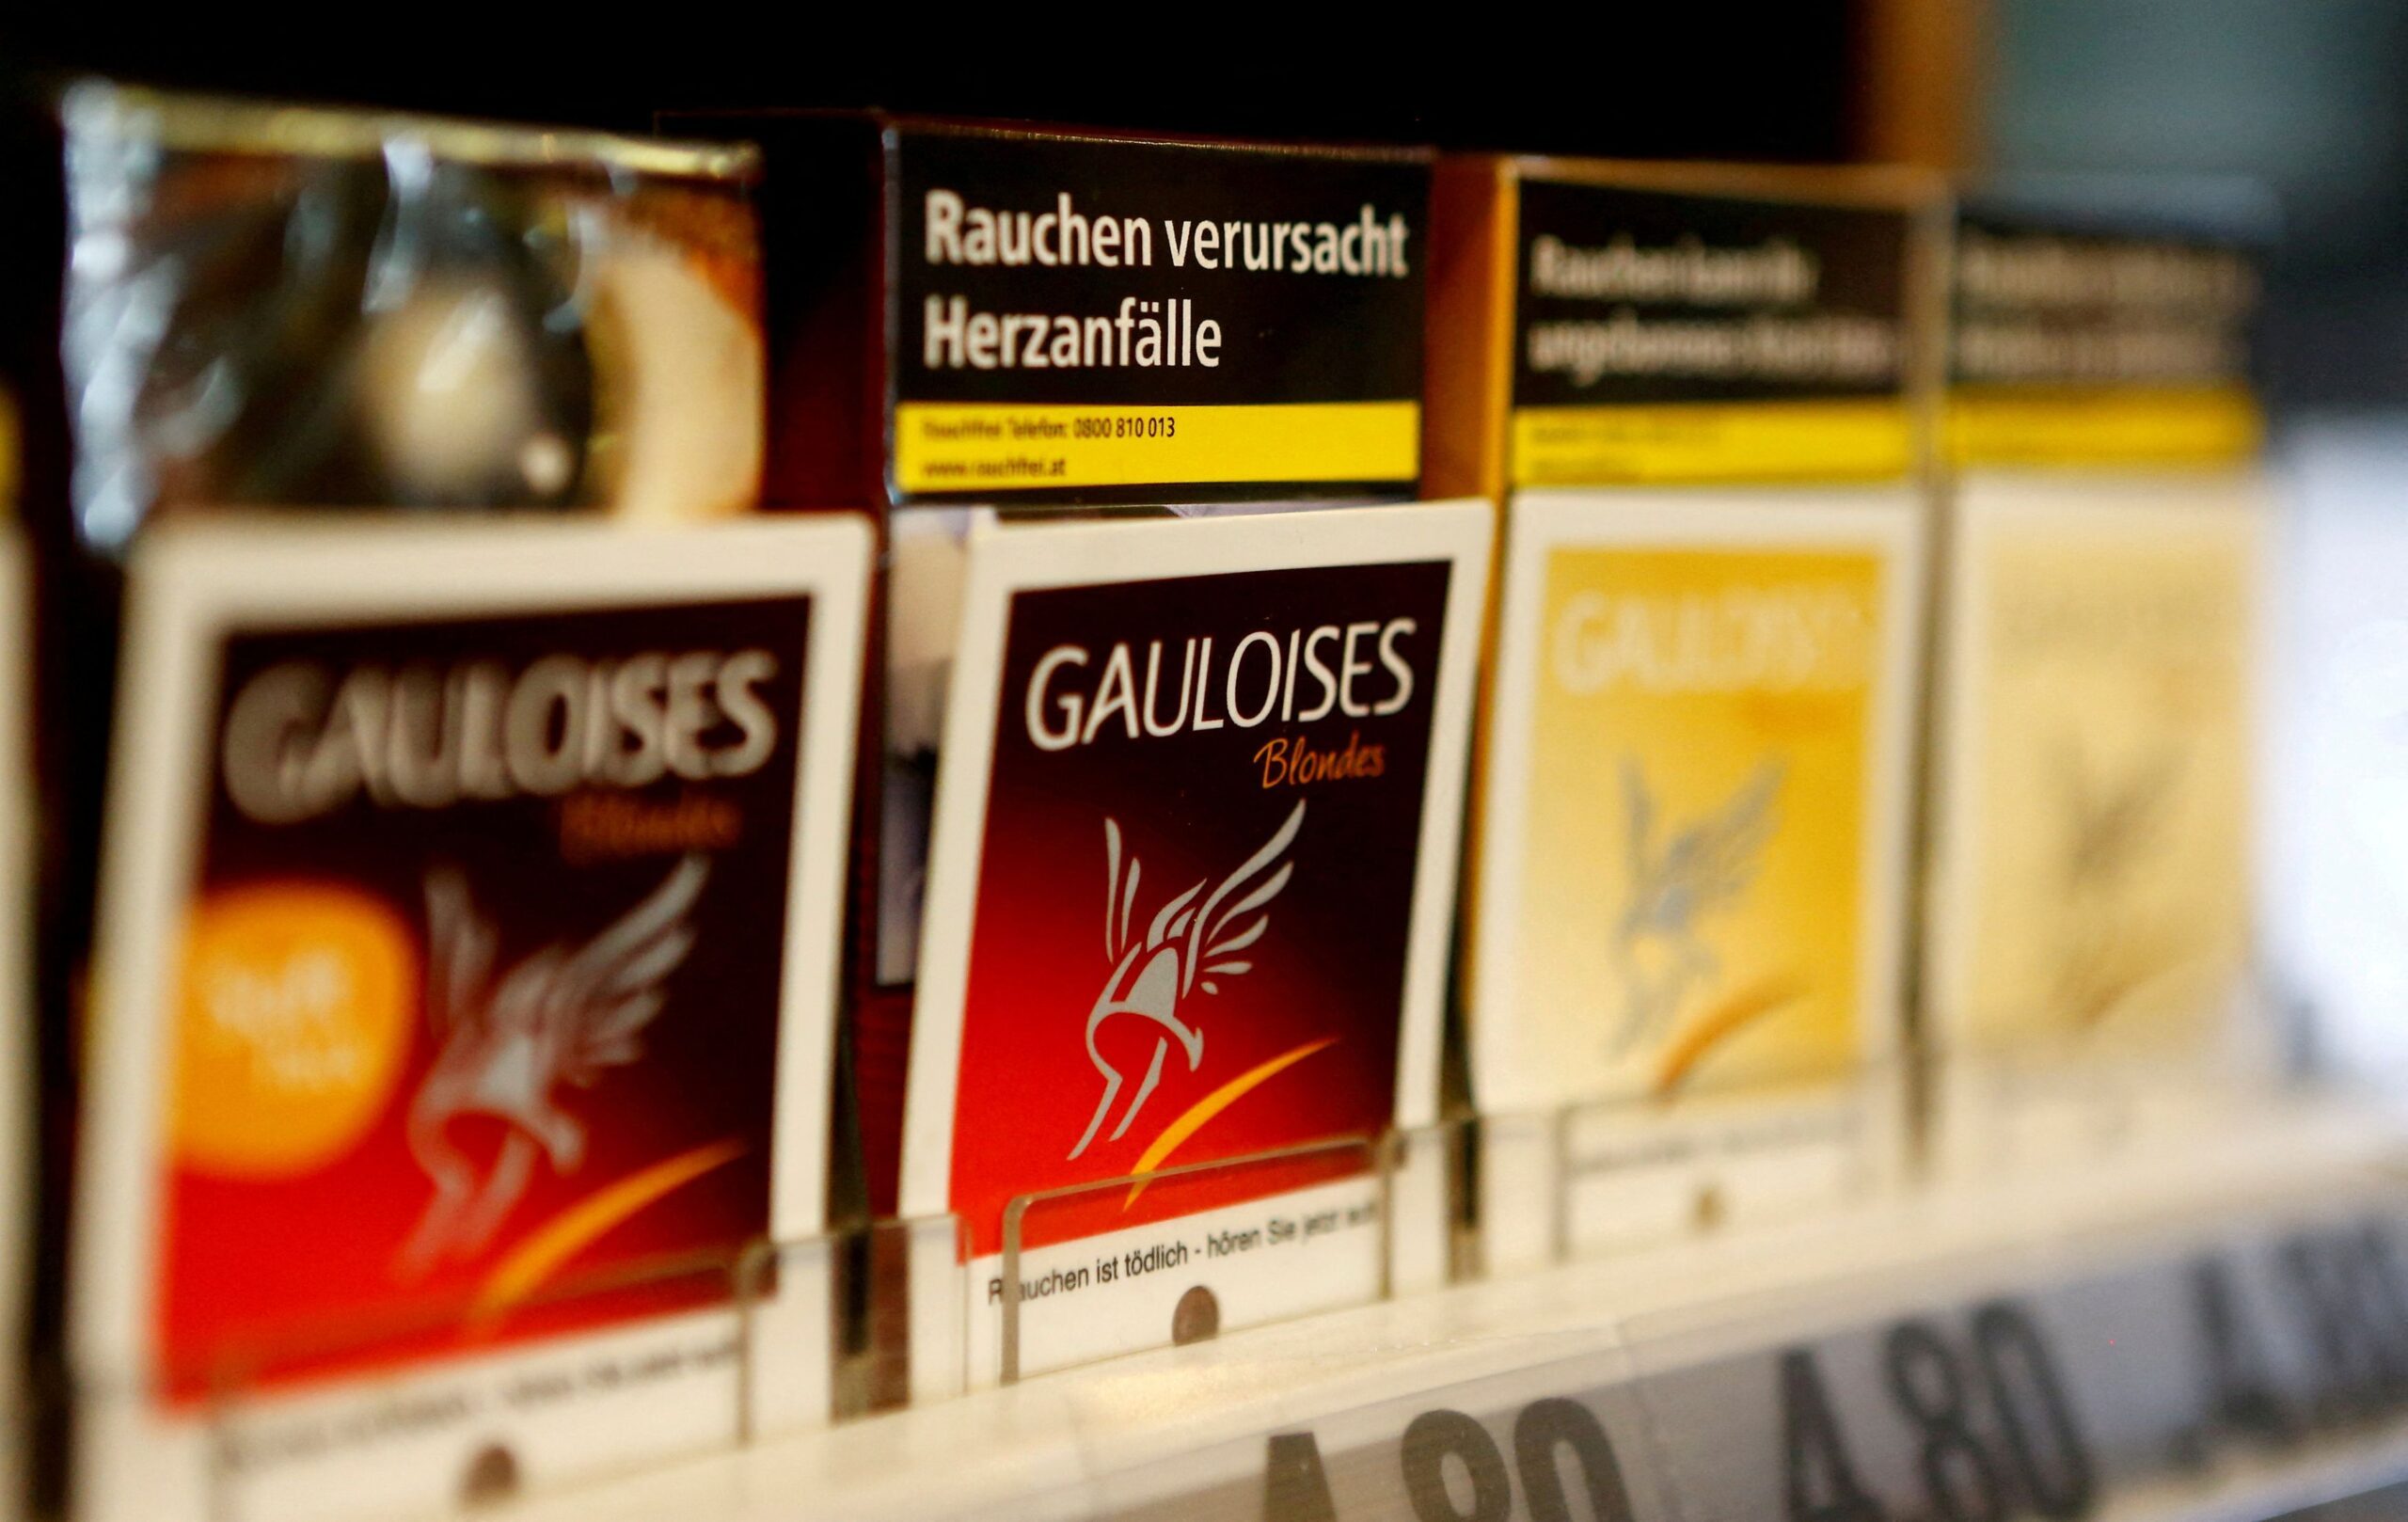 Cigarette maker Imperial Brands in talks to transfer Russian business